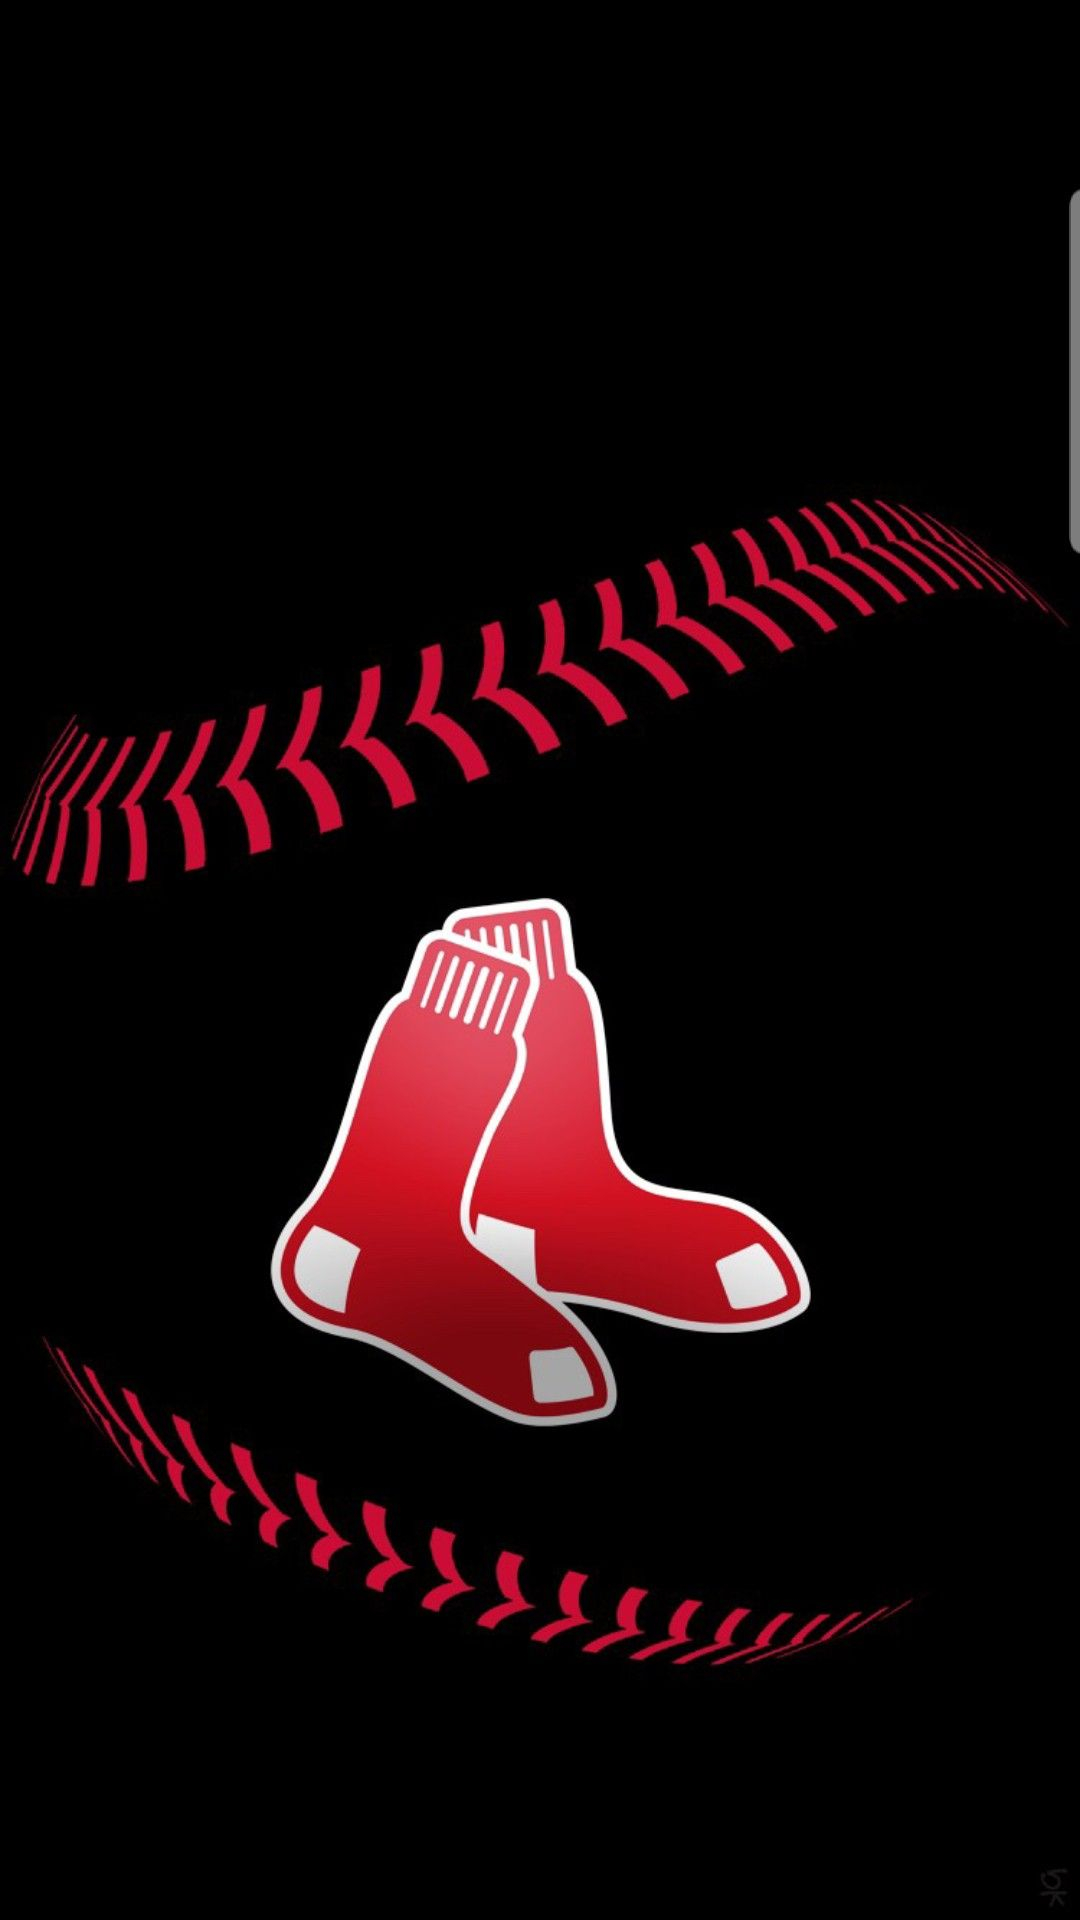 1080x1920 Pin by Tony Licon on Red Sox | Boston red sox wallpaper, Boston red sox logo, Red sox wallpaper